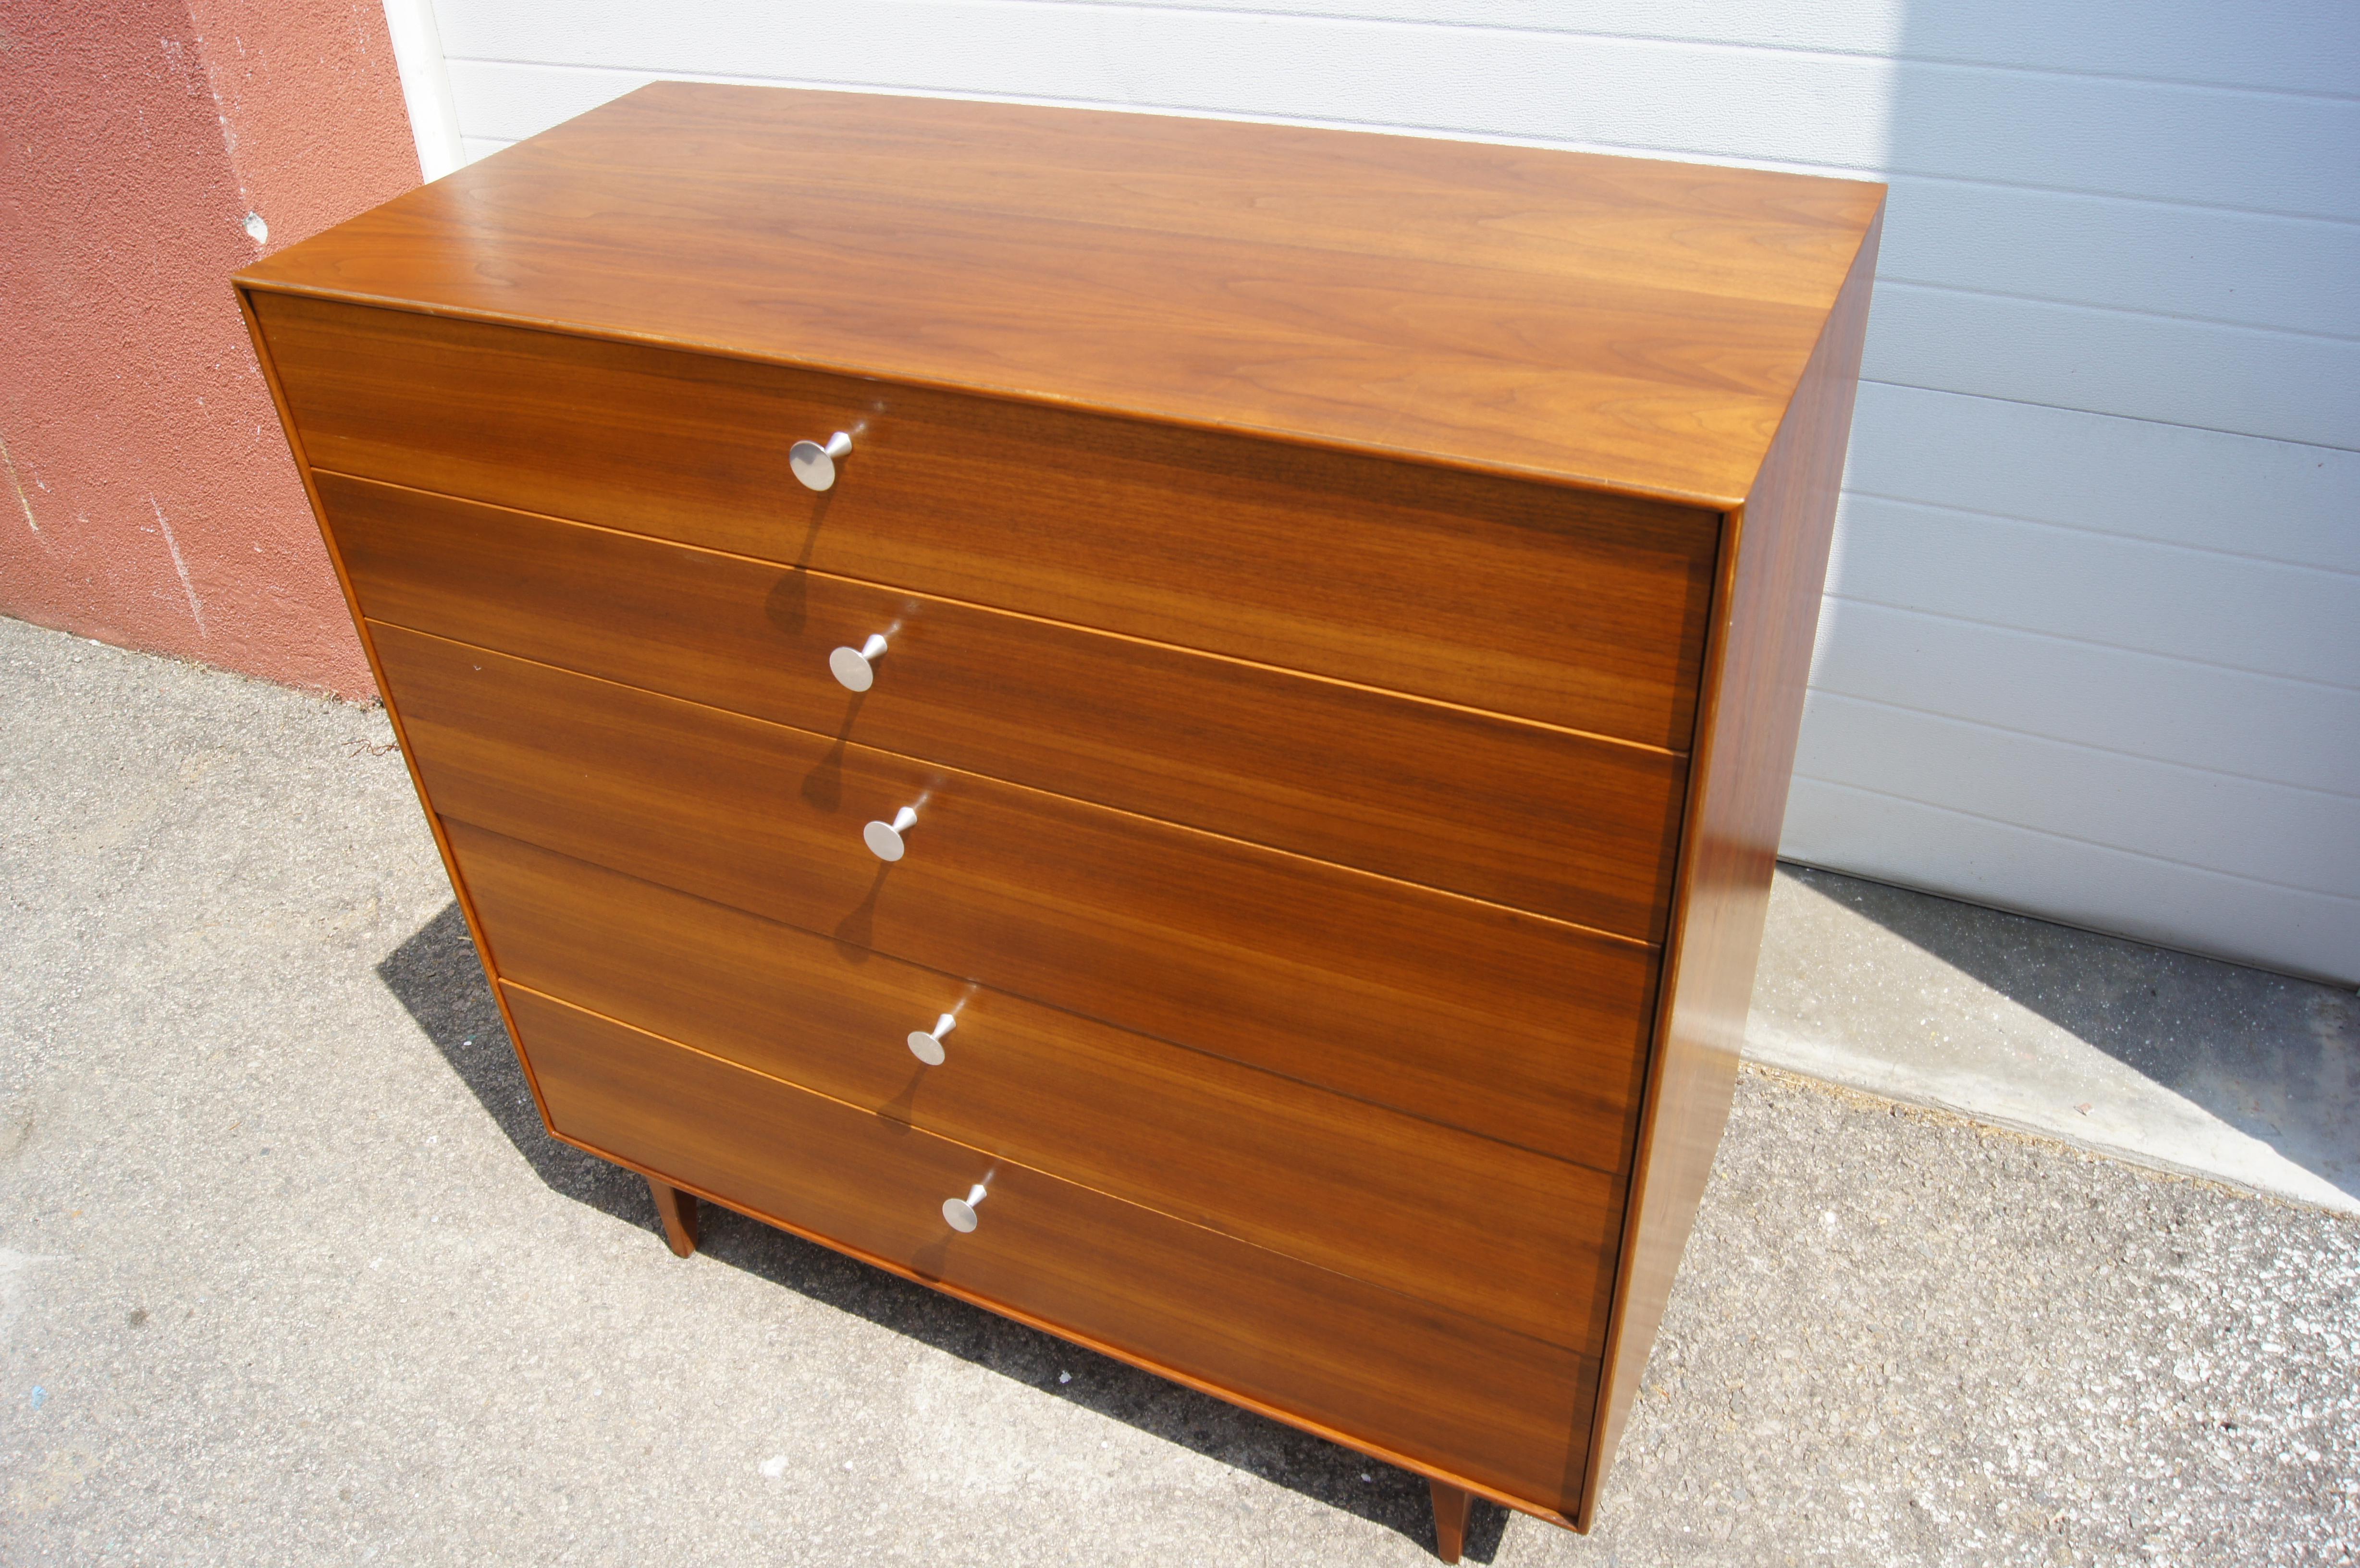 American Thin Edge Walnut Five-Drawer Dresser by George Nelson for Herman Miller